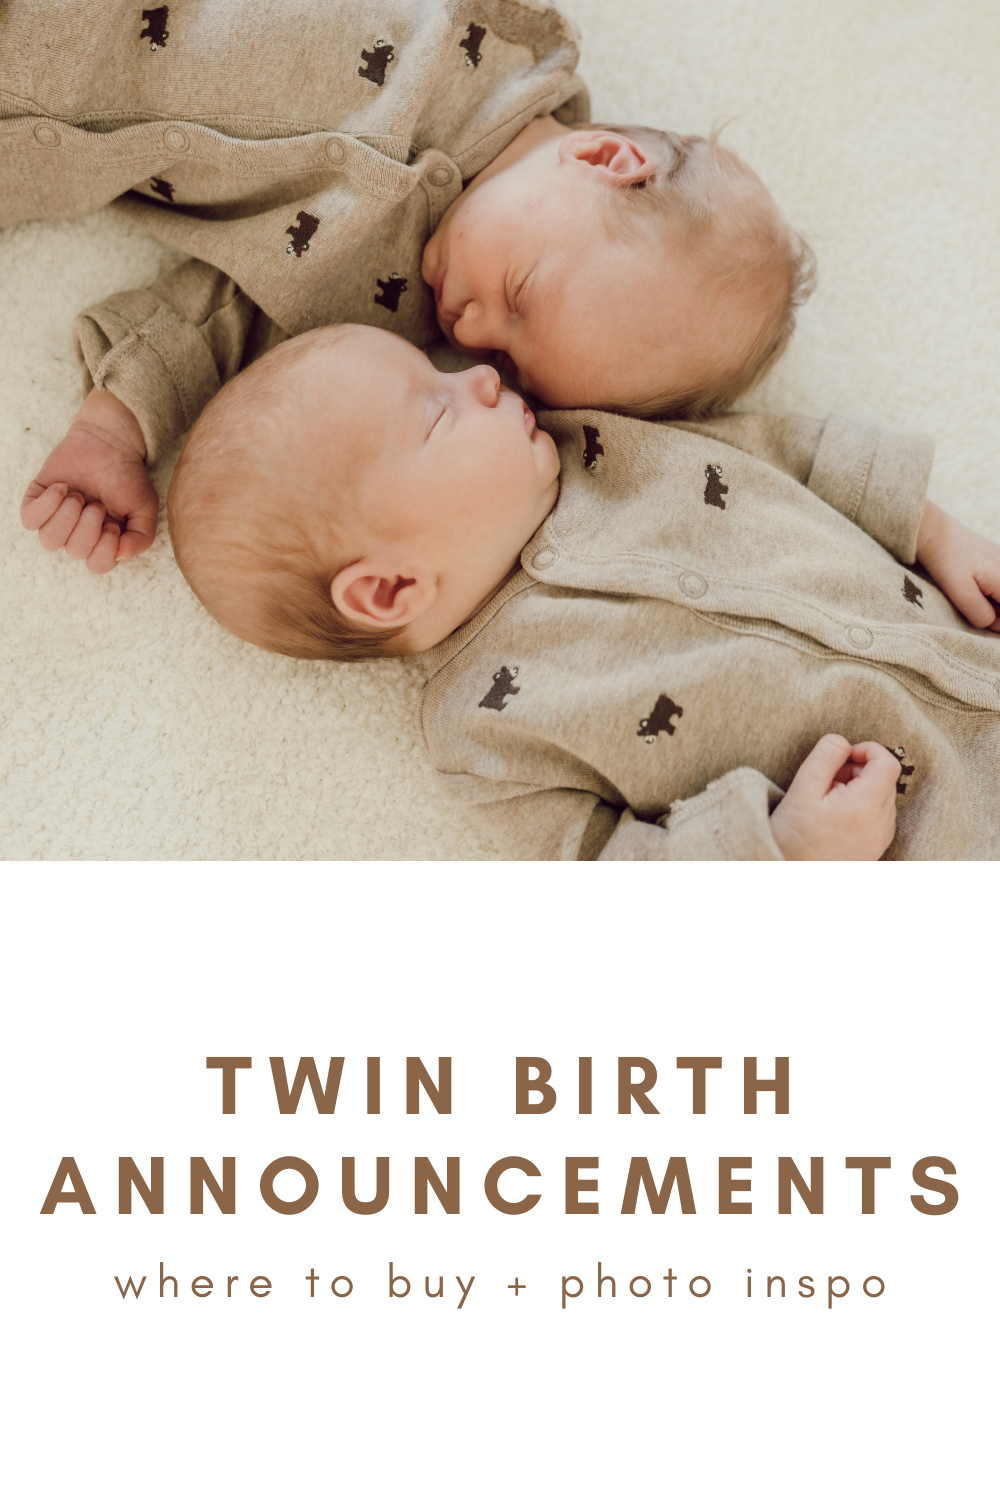 twin birth announcements, twinsies, twins, lments of style, newborn photos, la blogger, boy girl twins, baby announcement cards for twins, minted